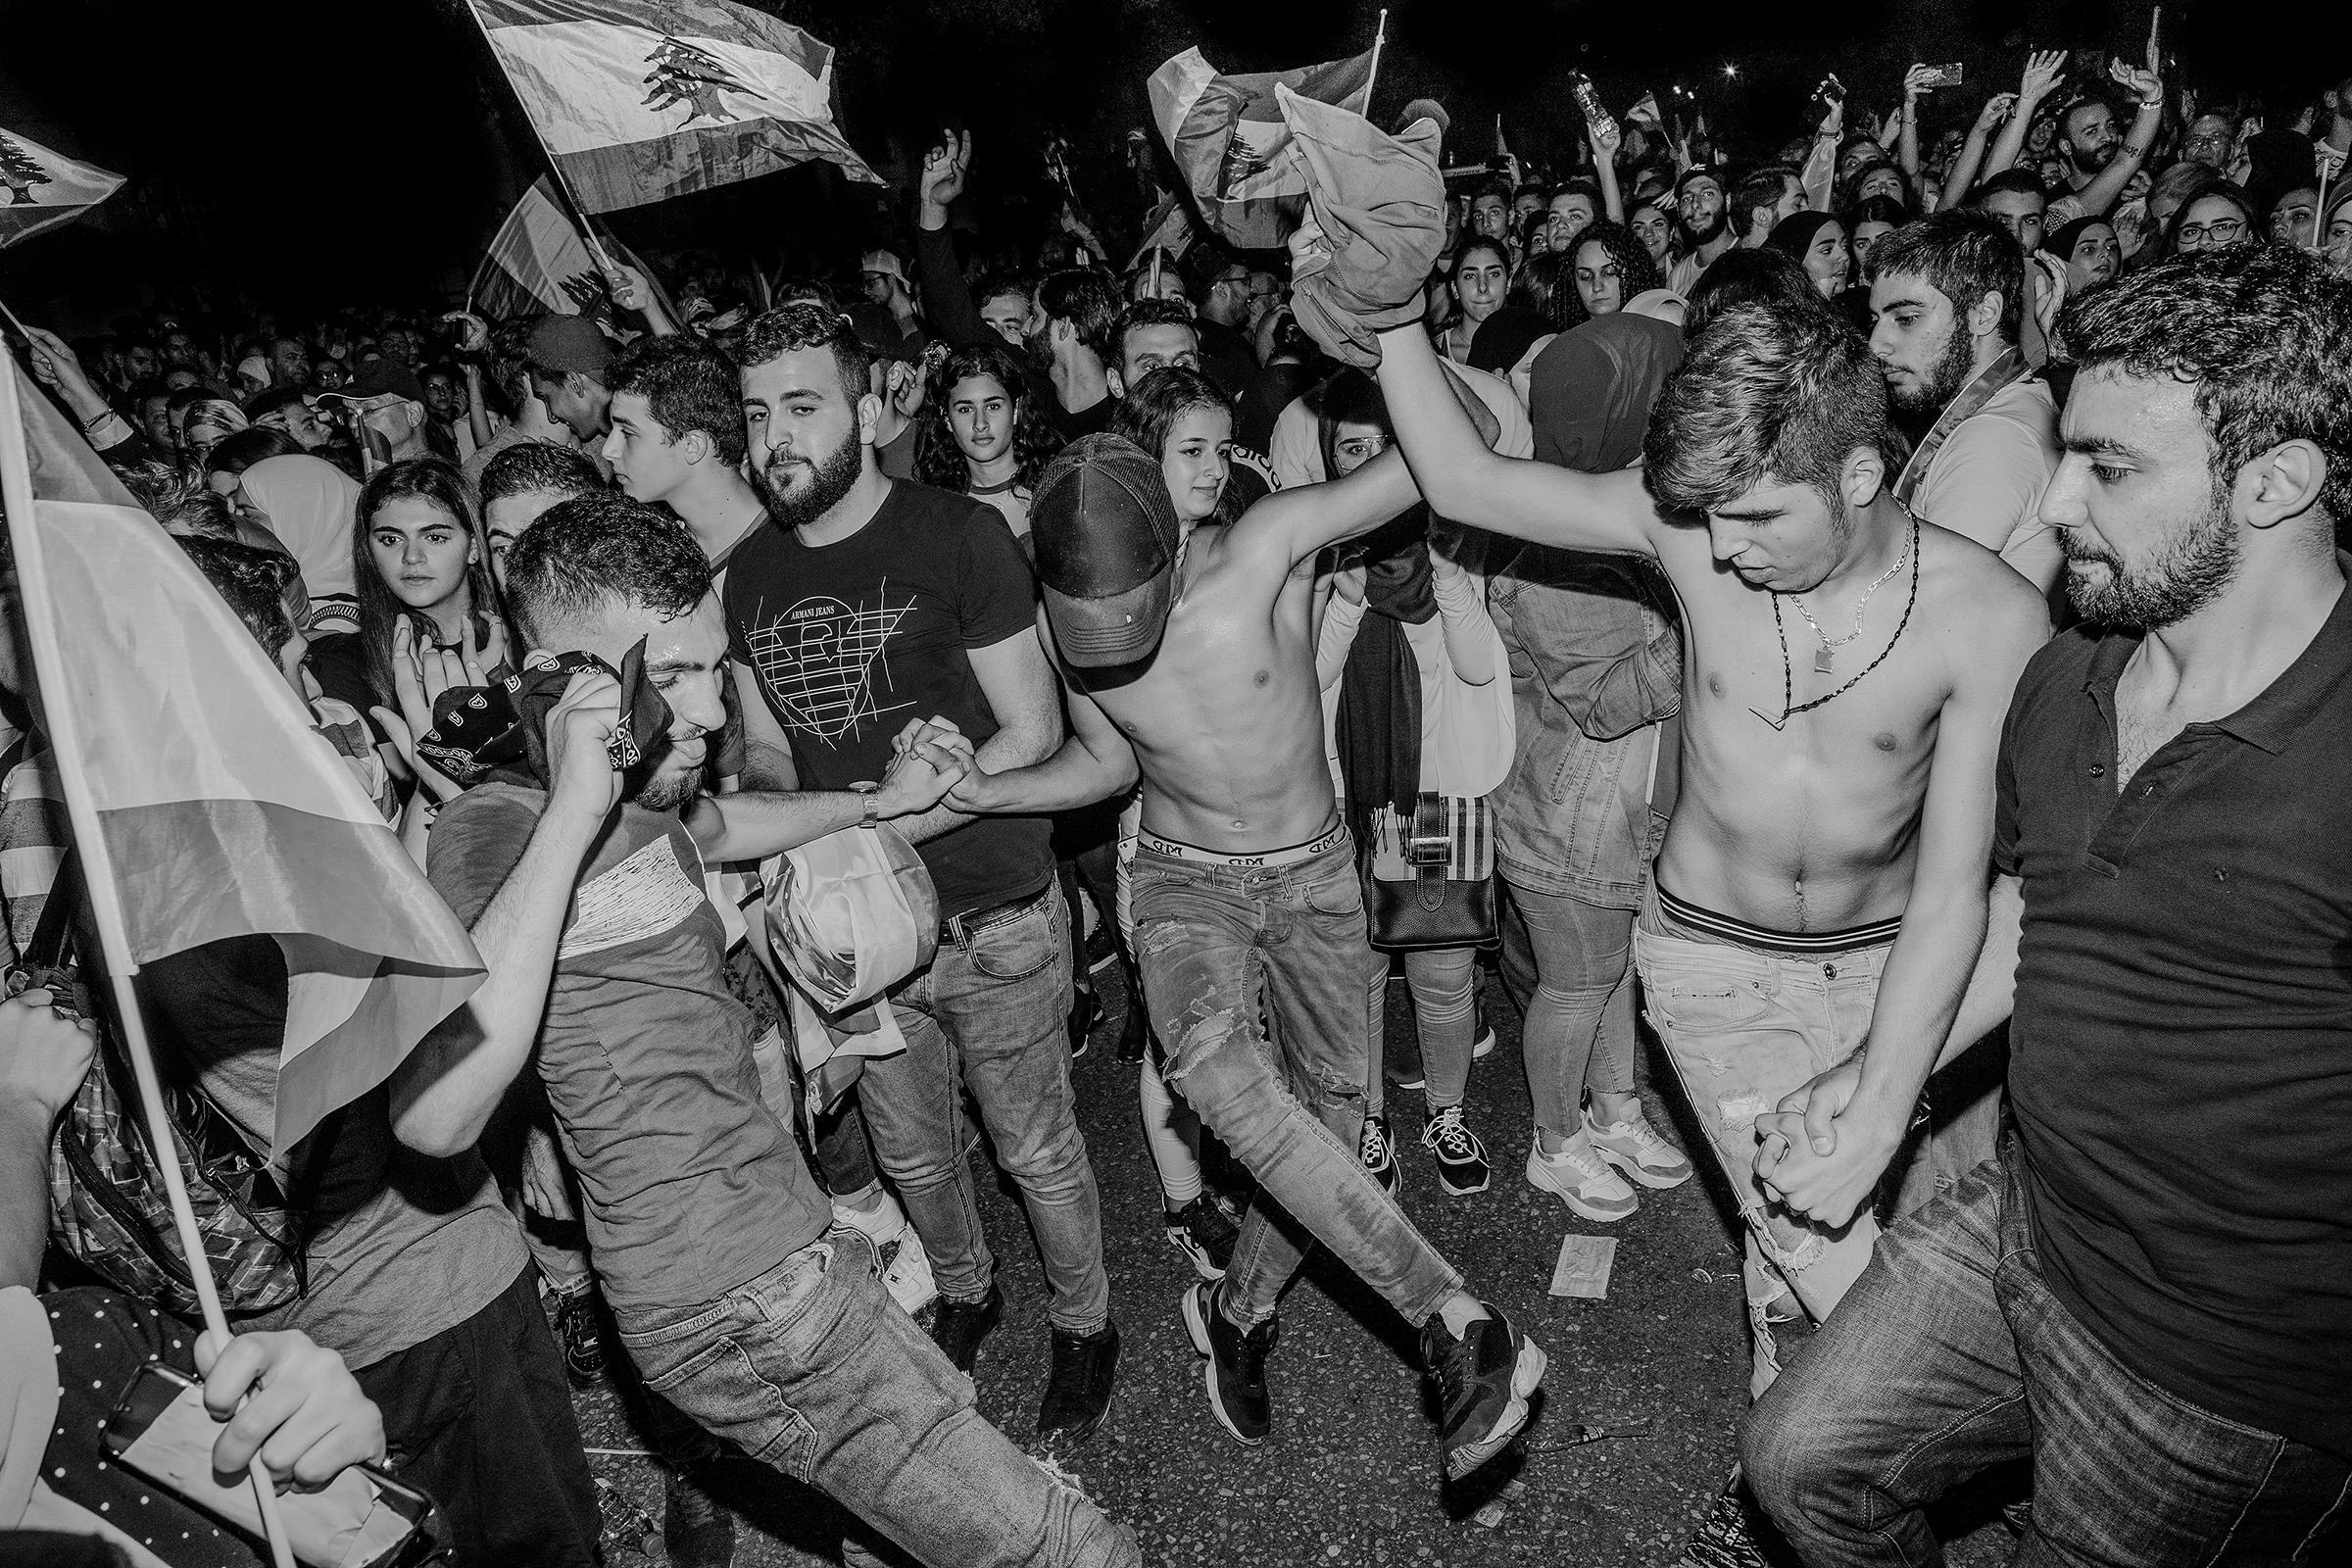 Men dance at a protest in Beirut on Oct. 20, 2019. (Myriam Boulos)